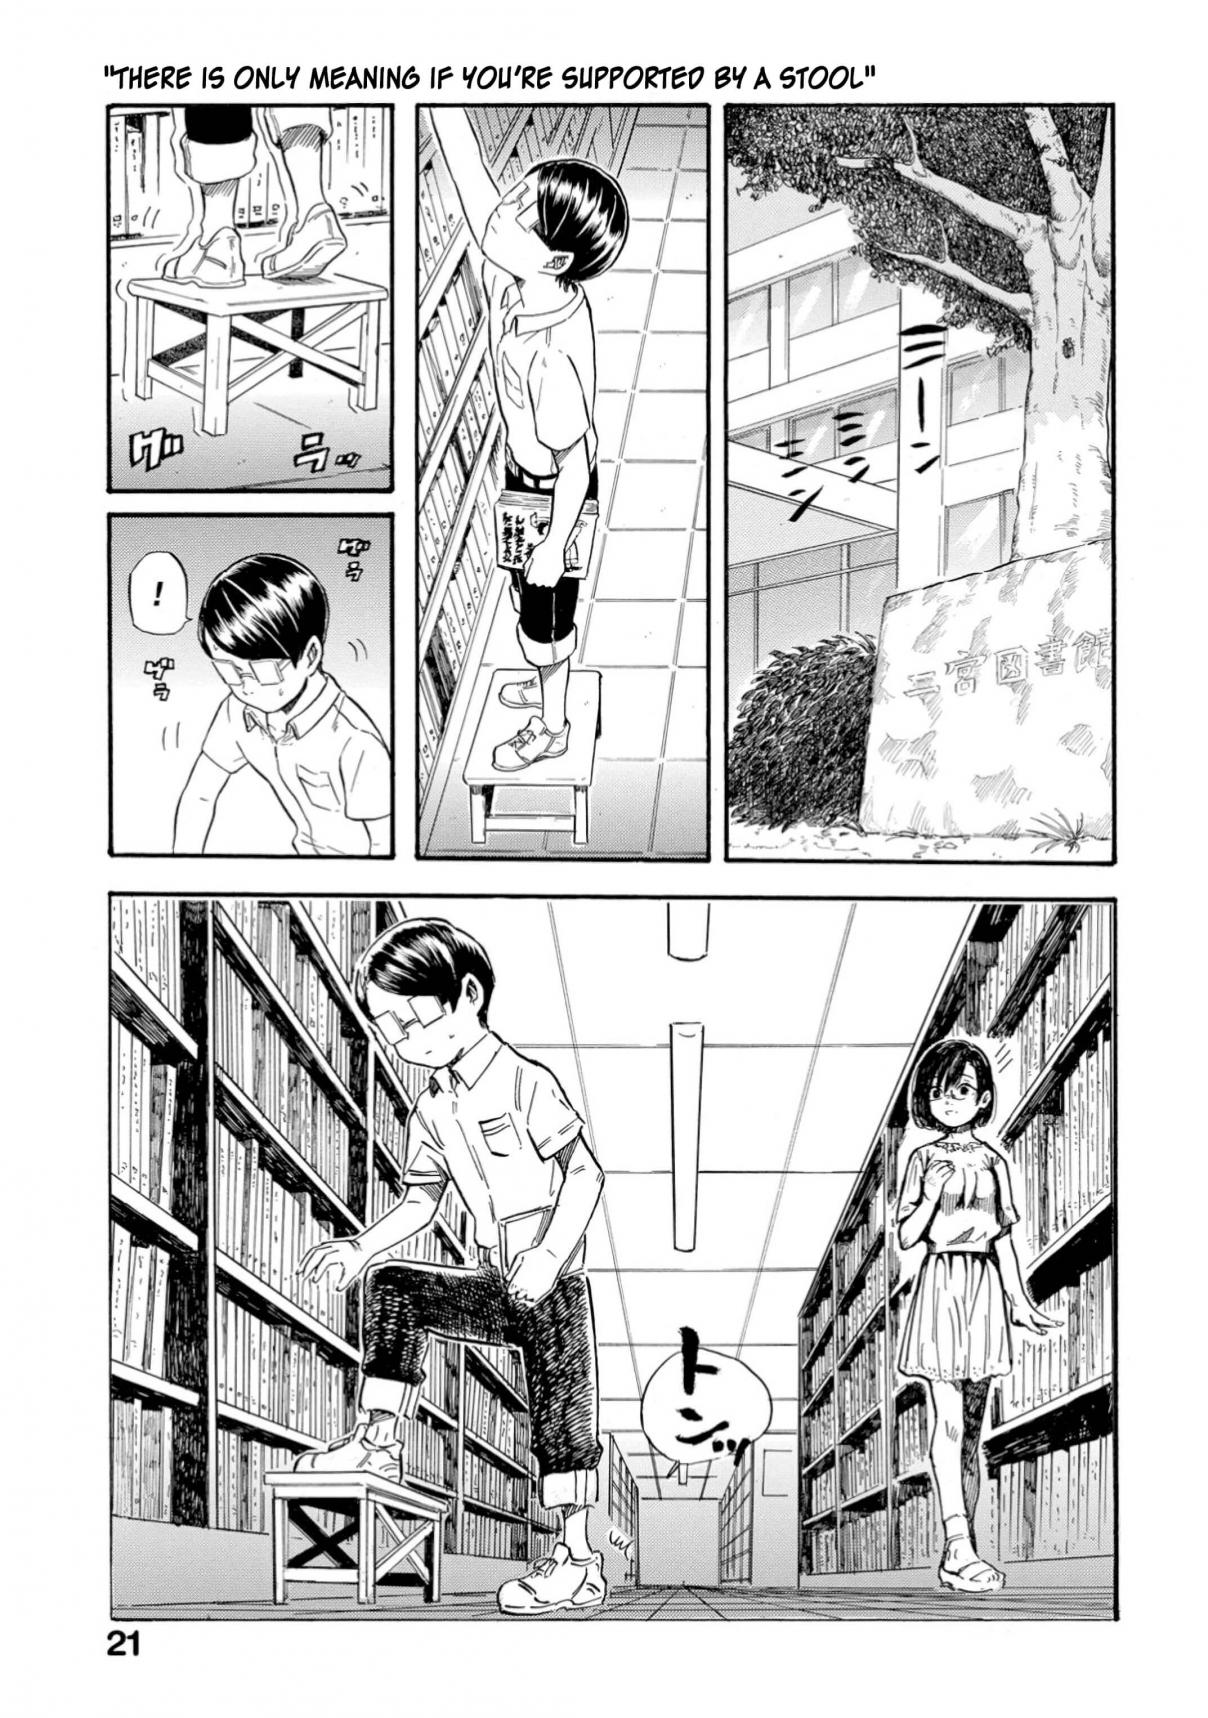 Yokoshima na Eguchi kun Vol. 1 Ch. 4 There is Only Meaning if You're Supported by a Stool